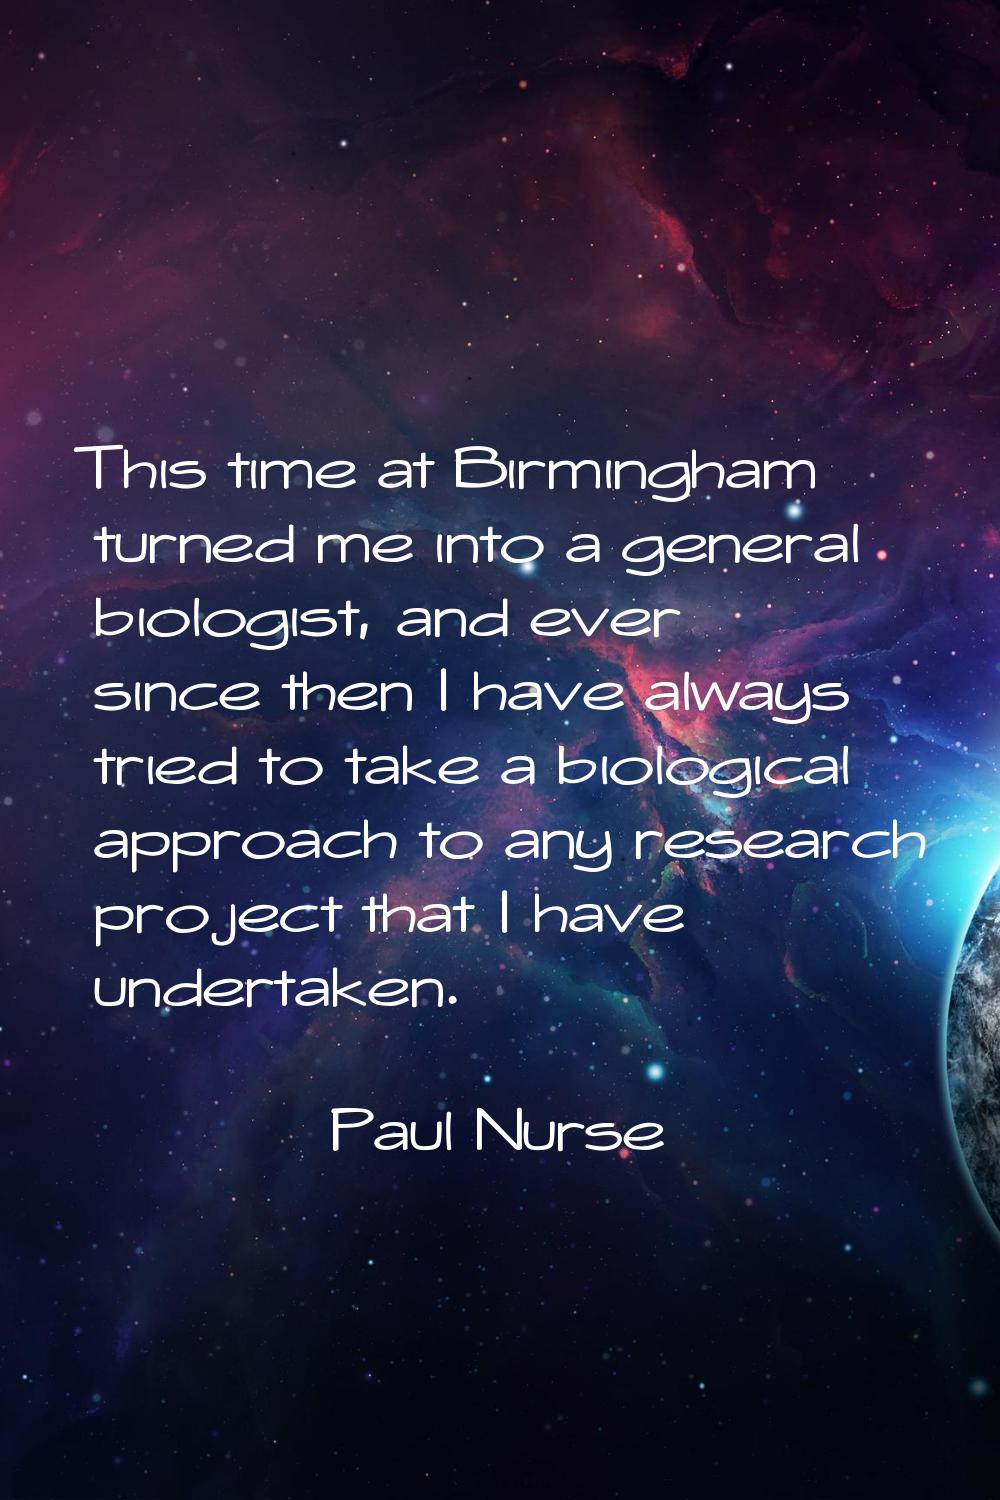 This time at Birmingham turned me into a general biologist, and ever since then I have always tried